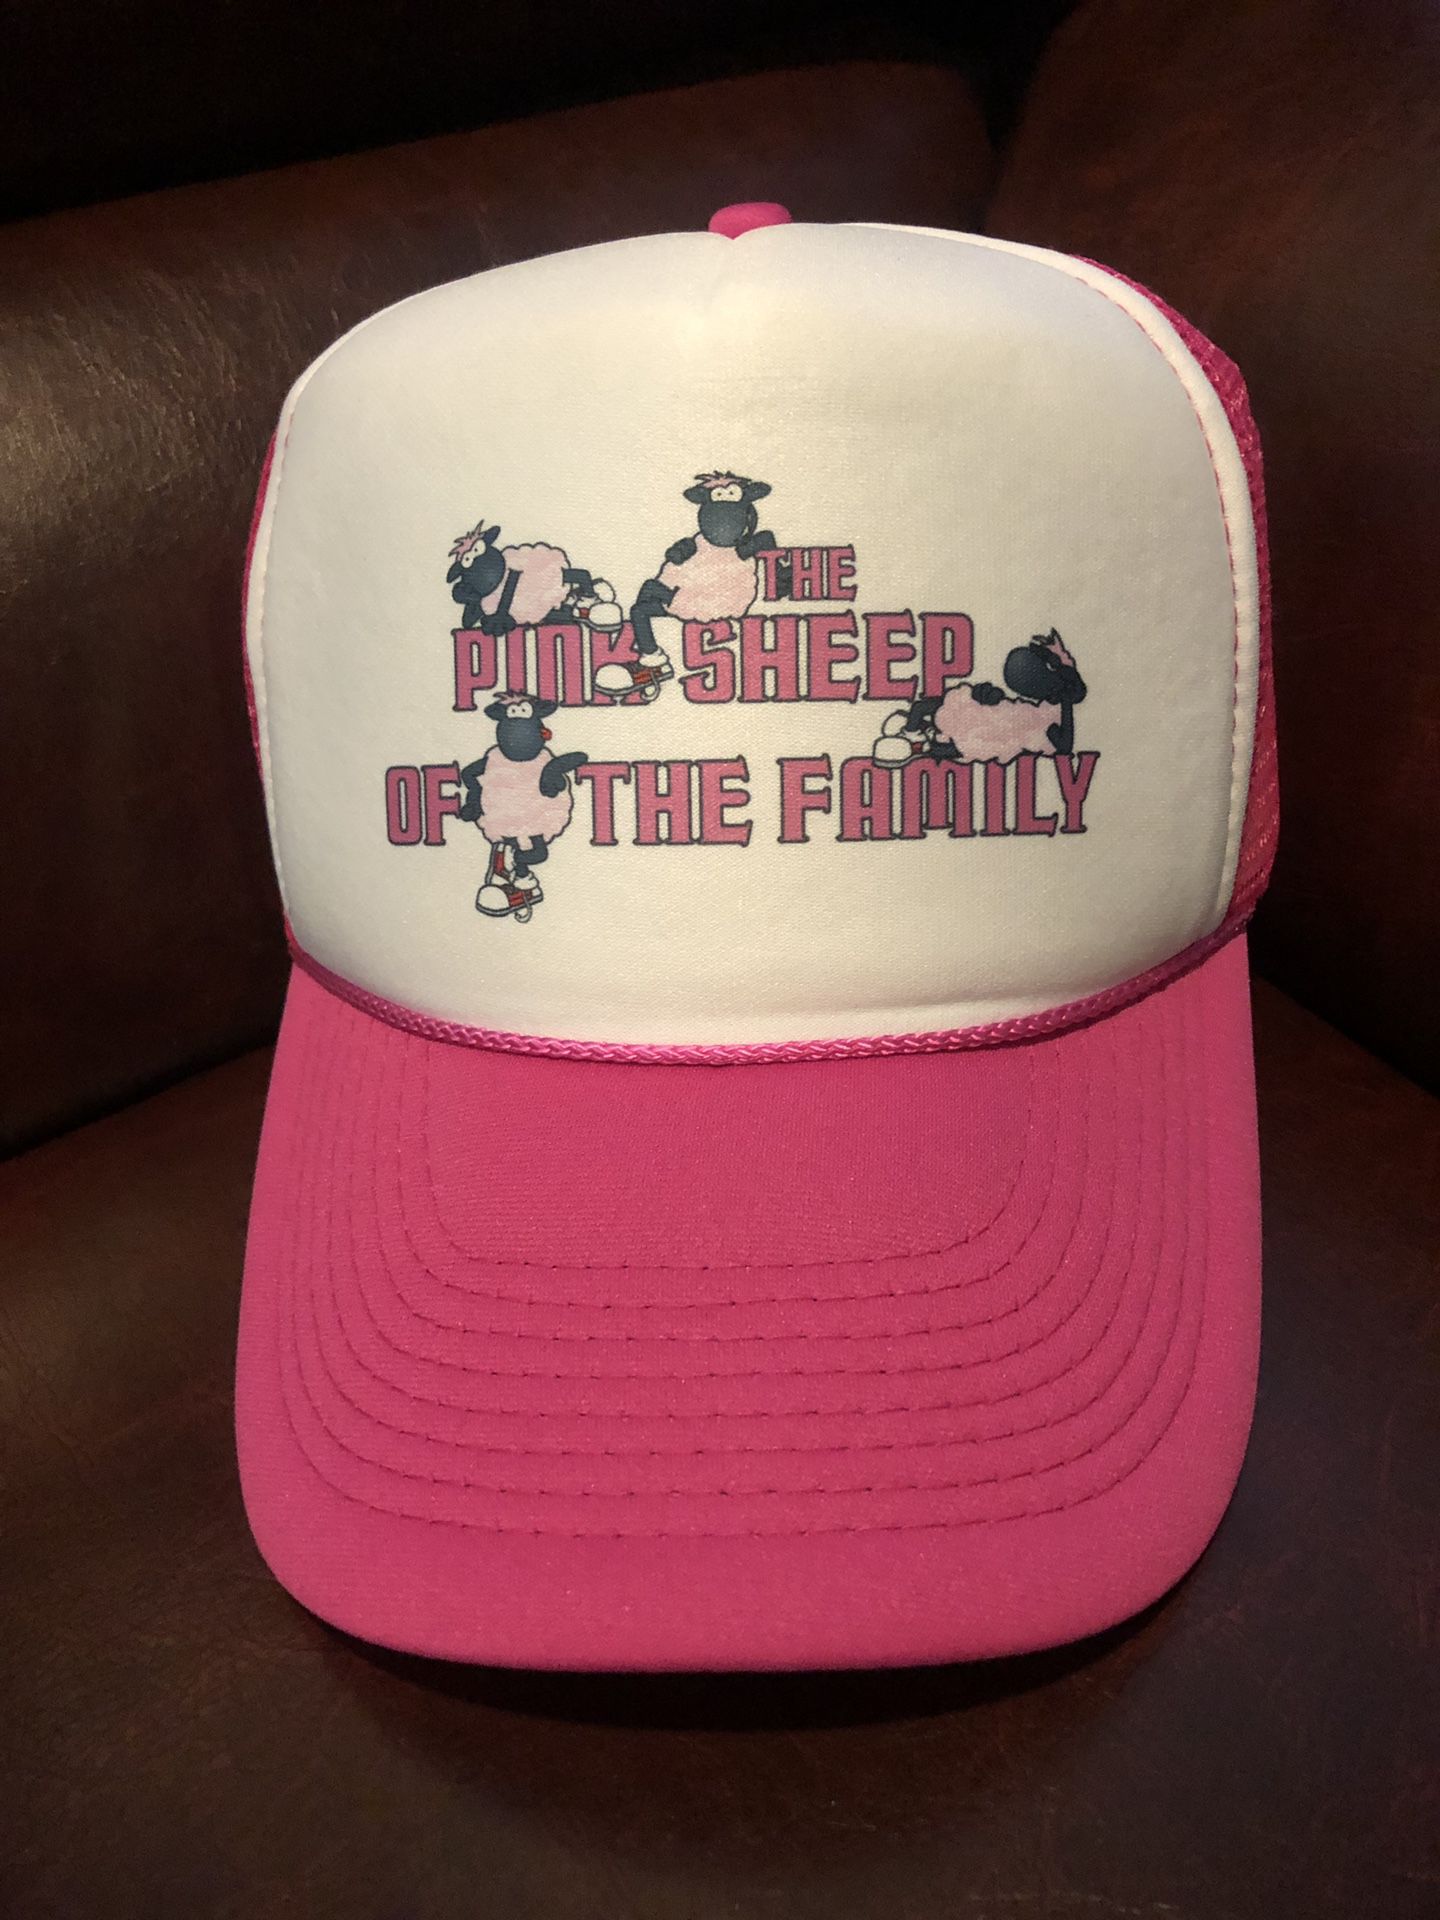 Trucker hat - The Pink Sheet of the Family